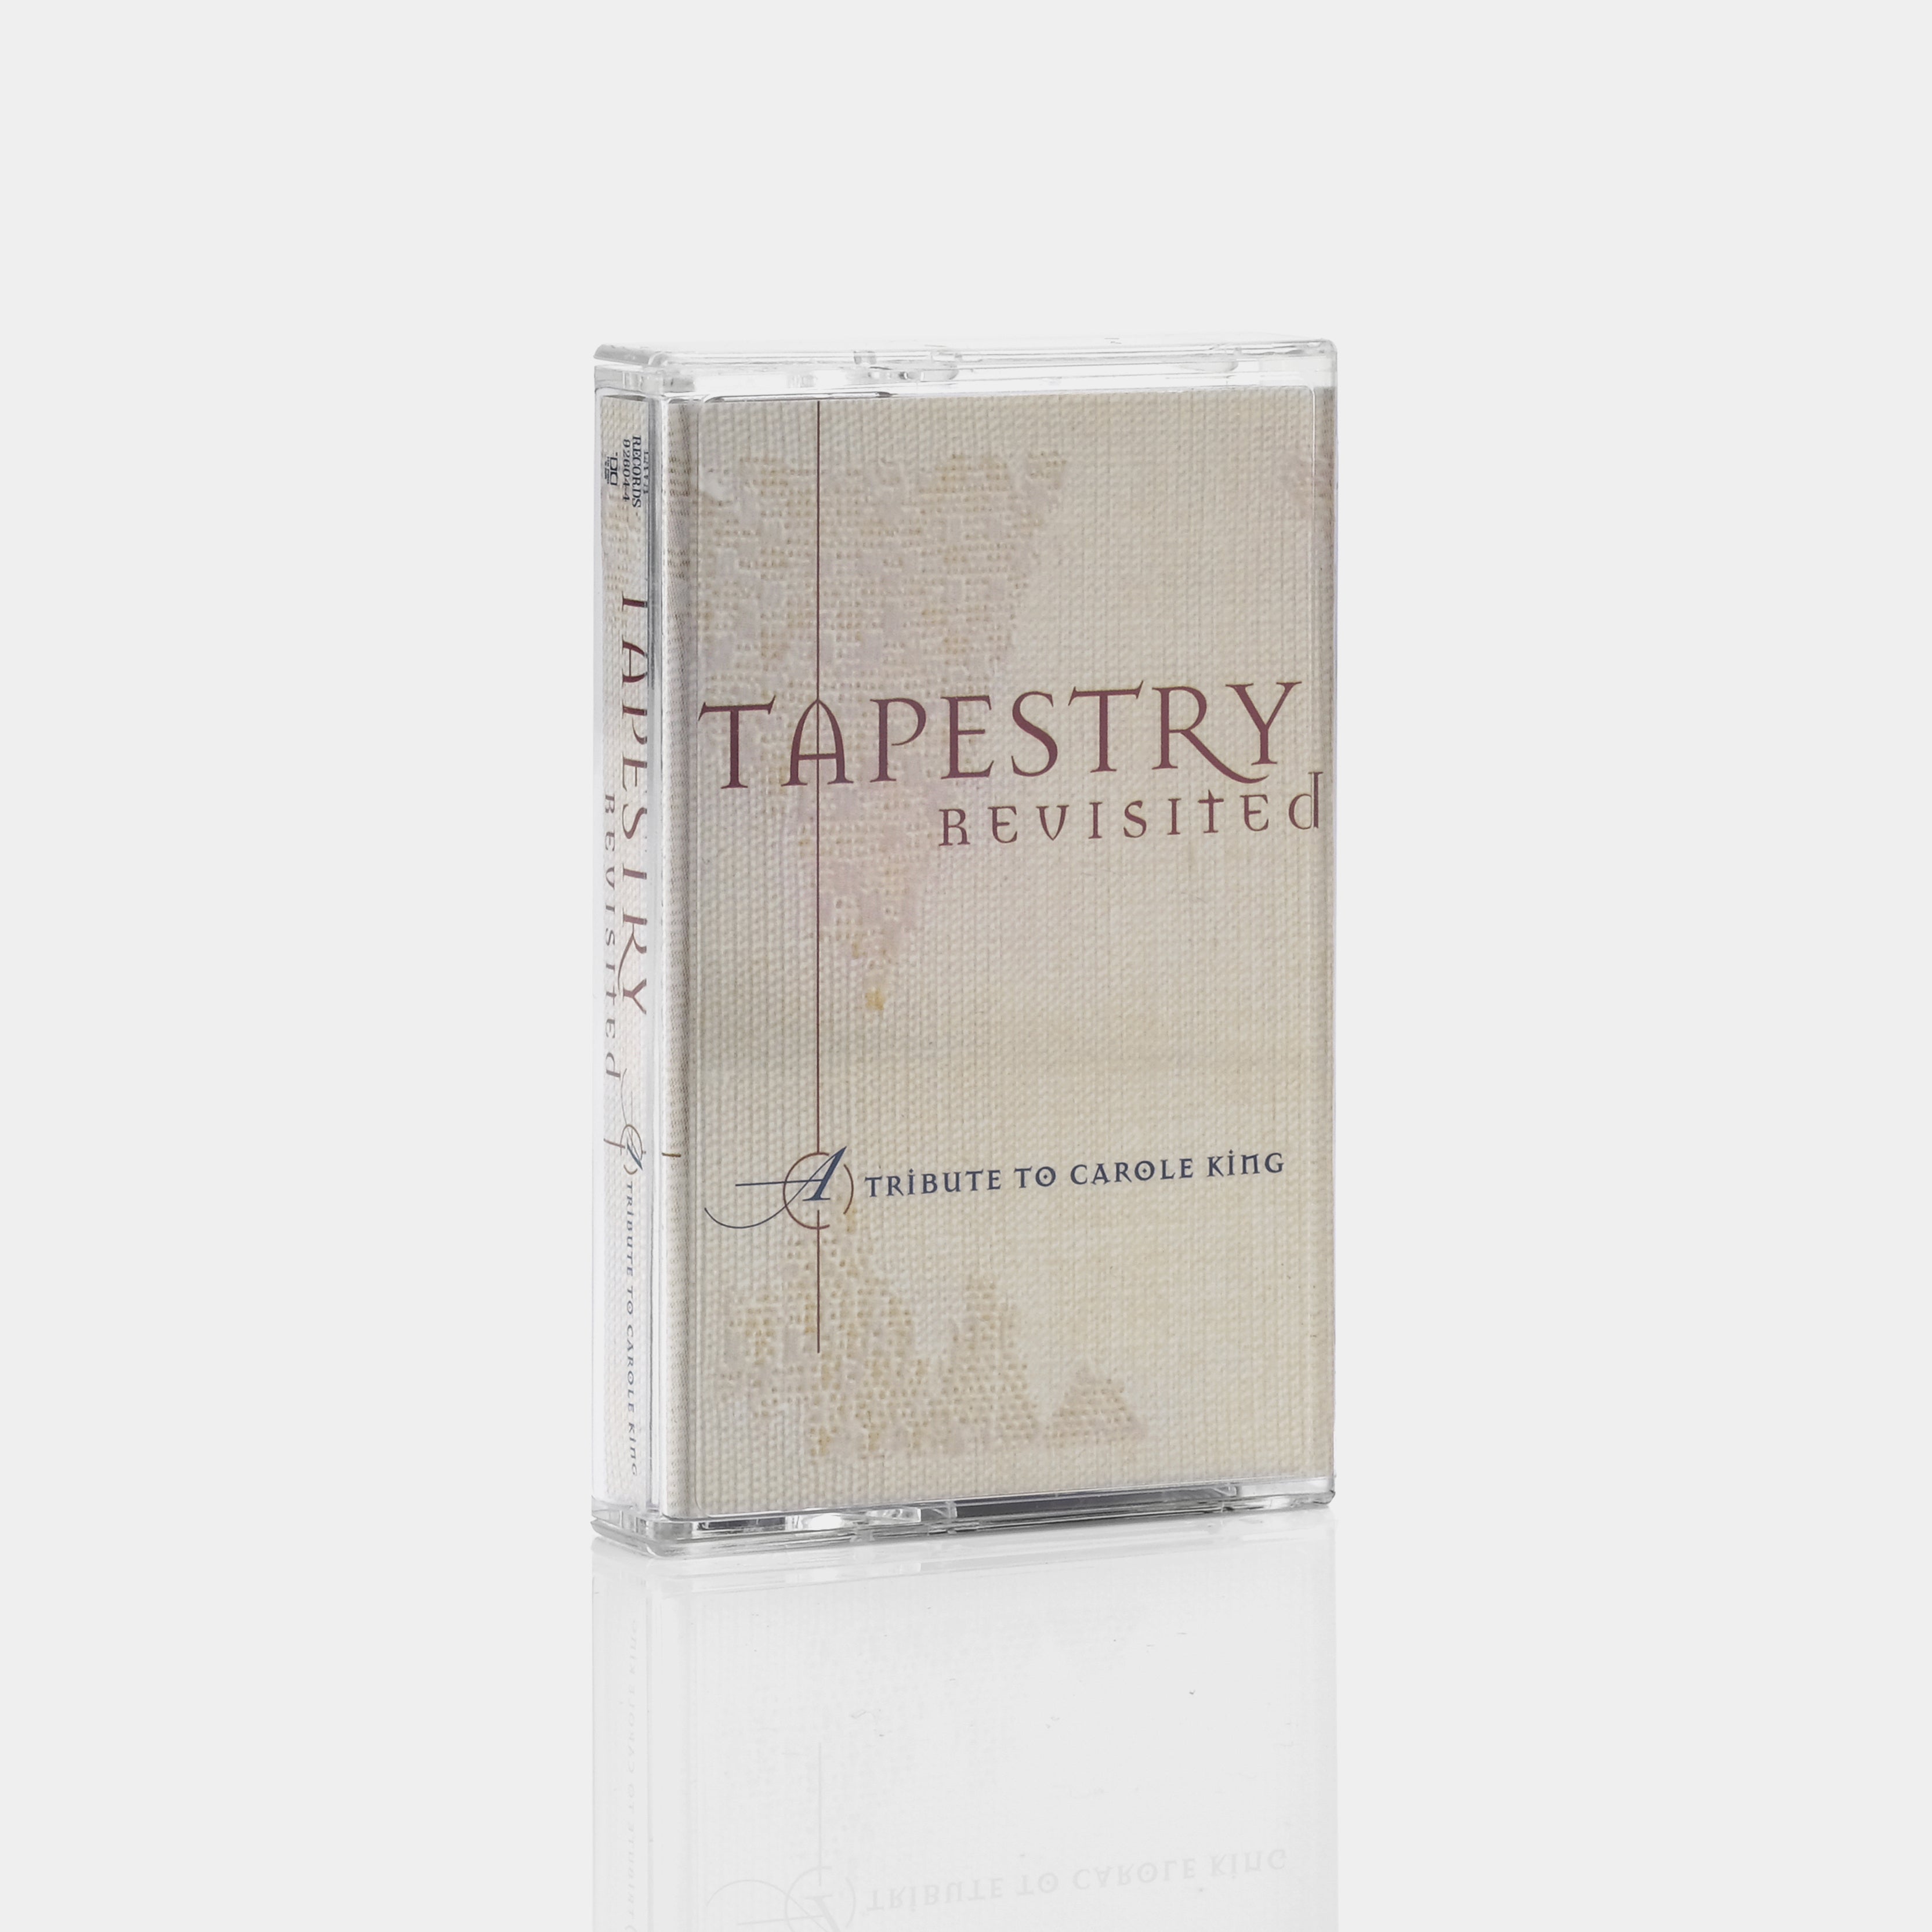 Tapestry Revisited (A Tribute To Carole King) Cassette Tape